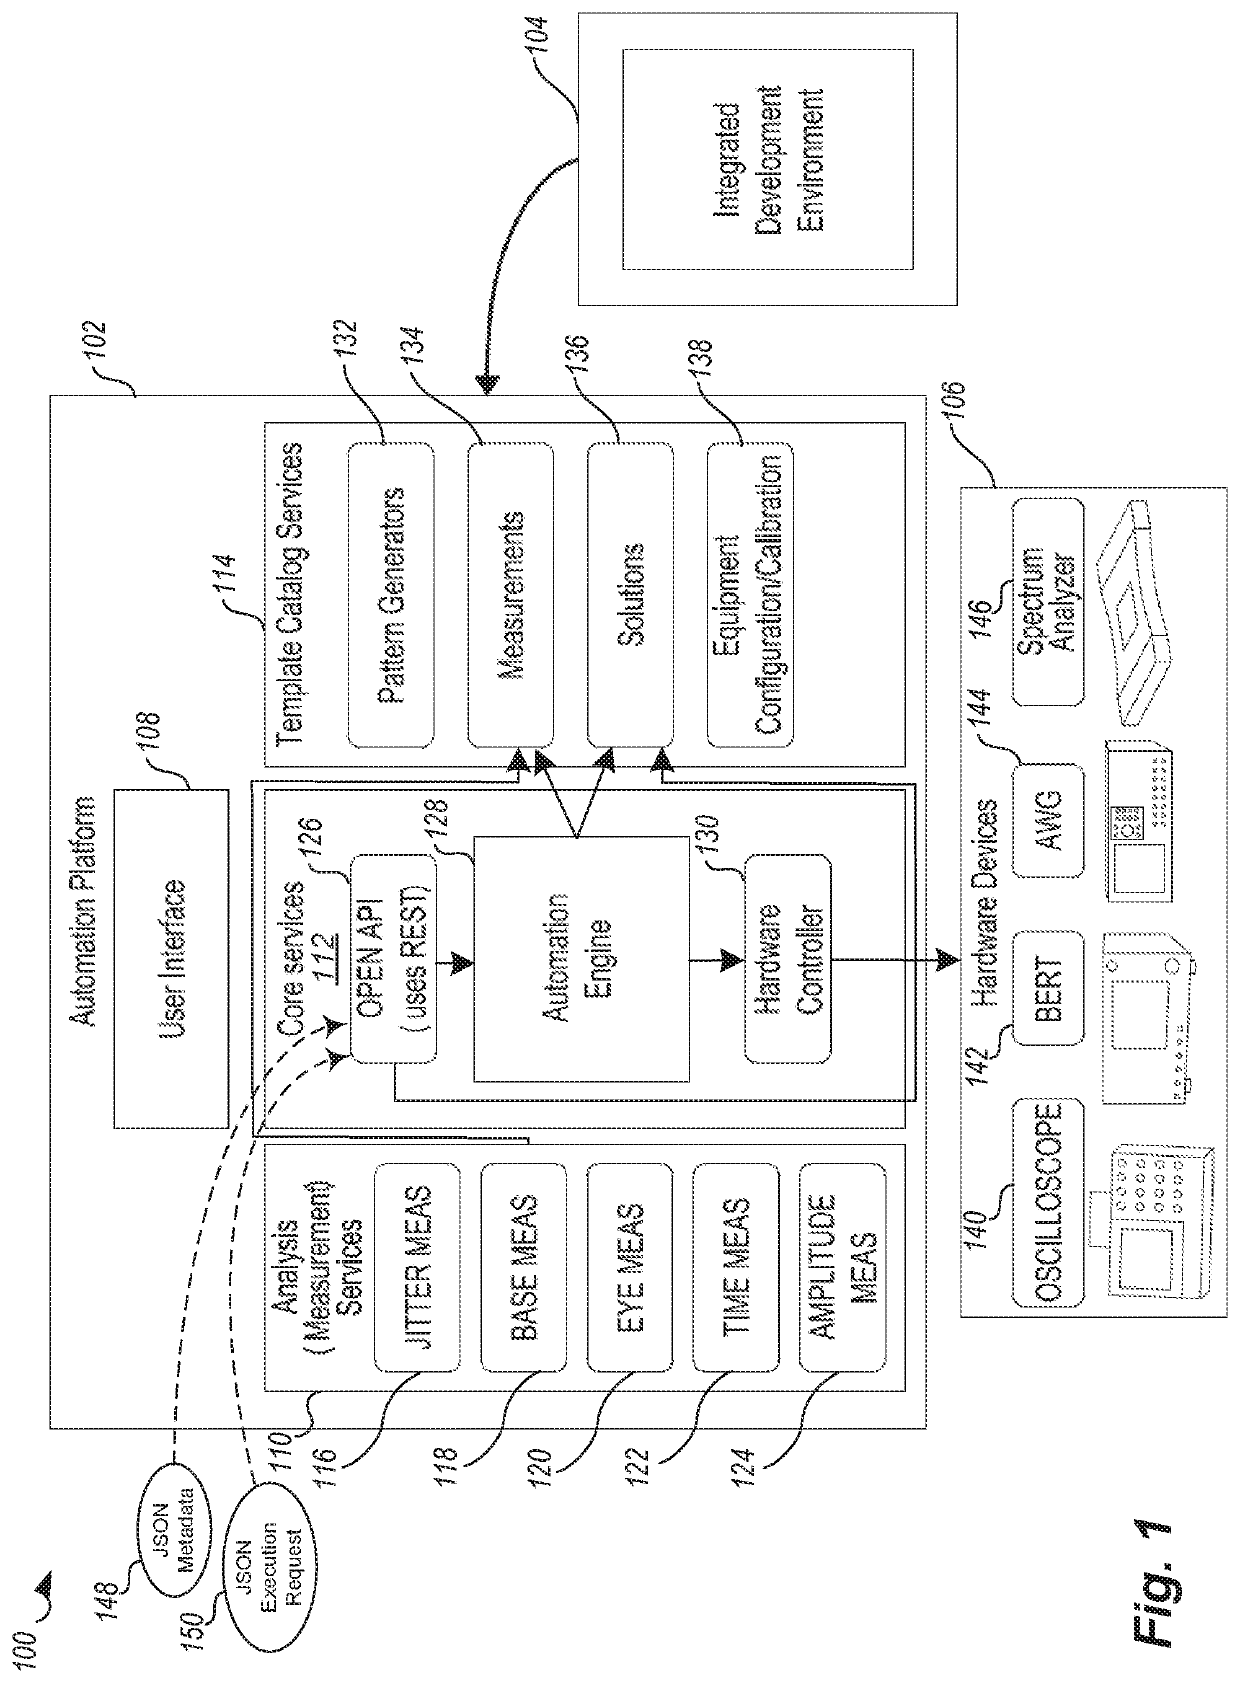 Disaggregated distributed measurement analysis system using dynamic application builder